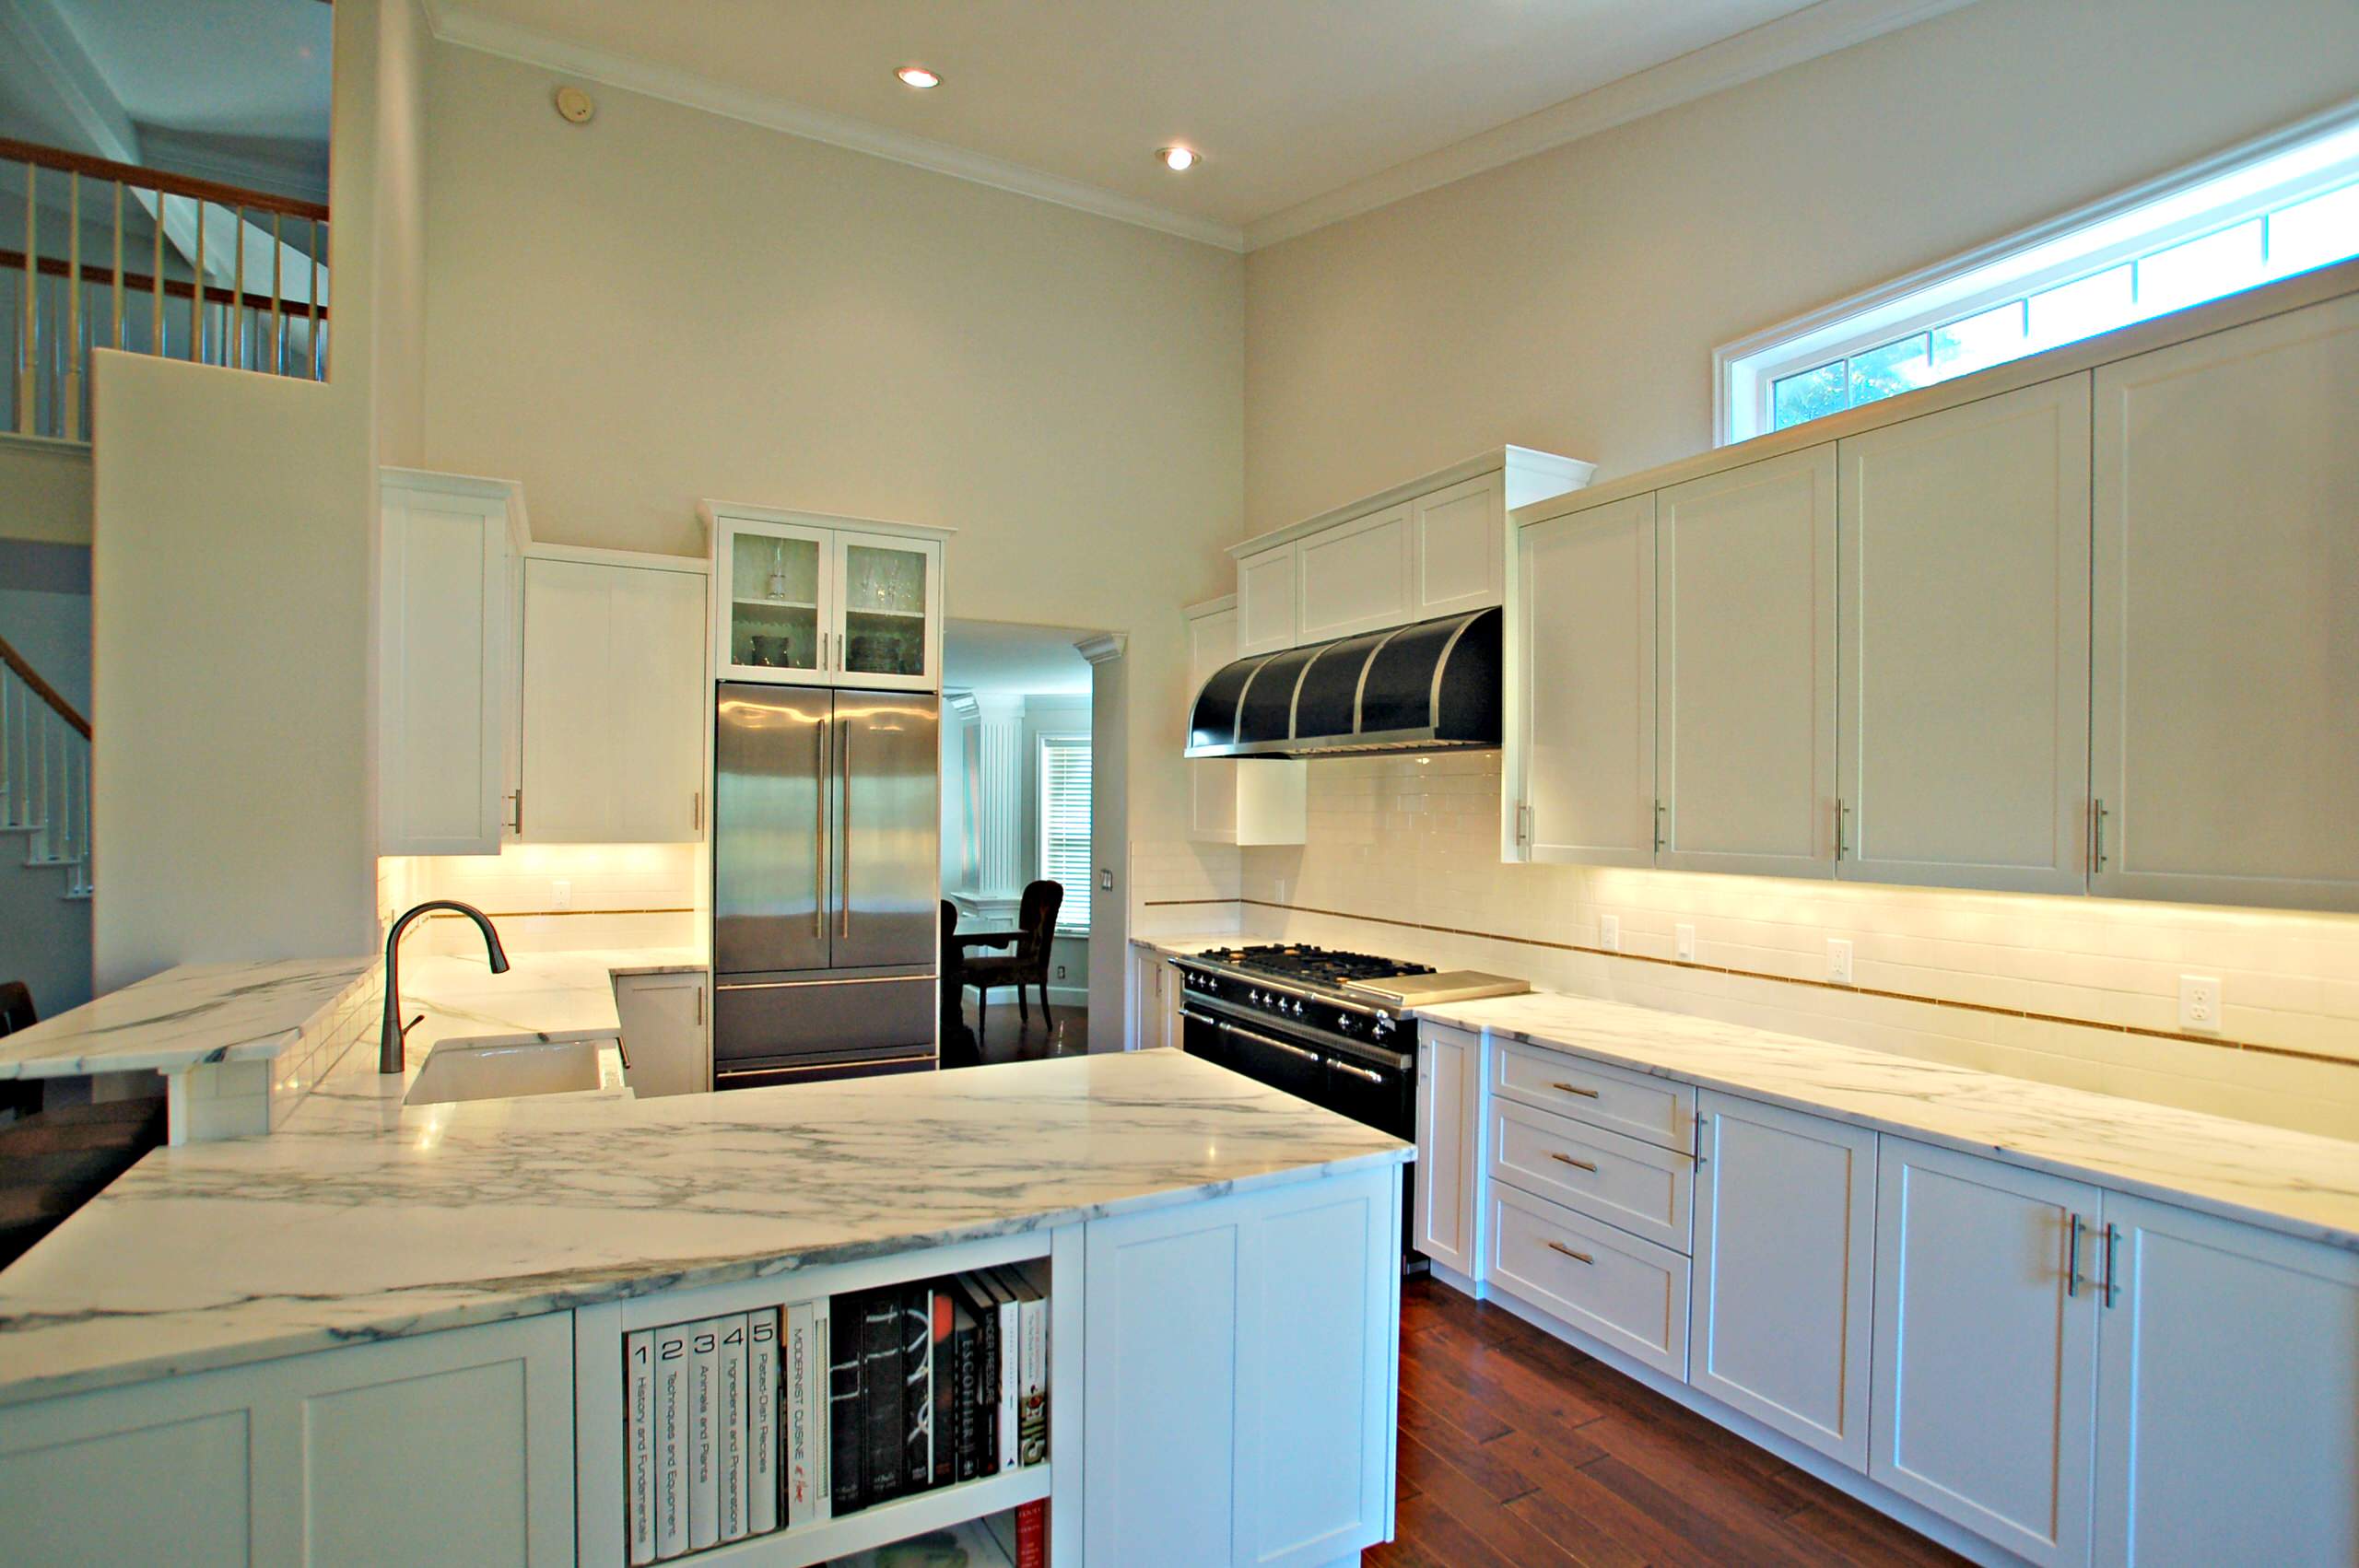 Gourmet Kitchen in Eagle with Lacanche French Range and Honed Calcutta Marble